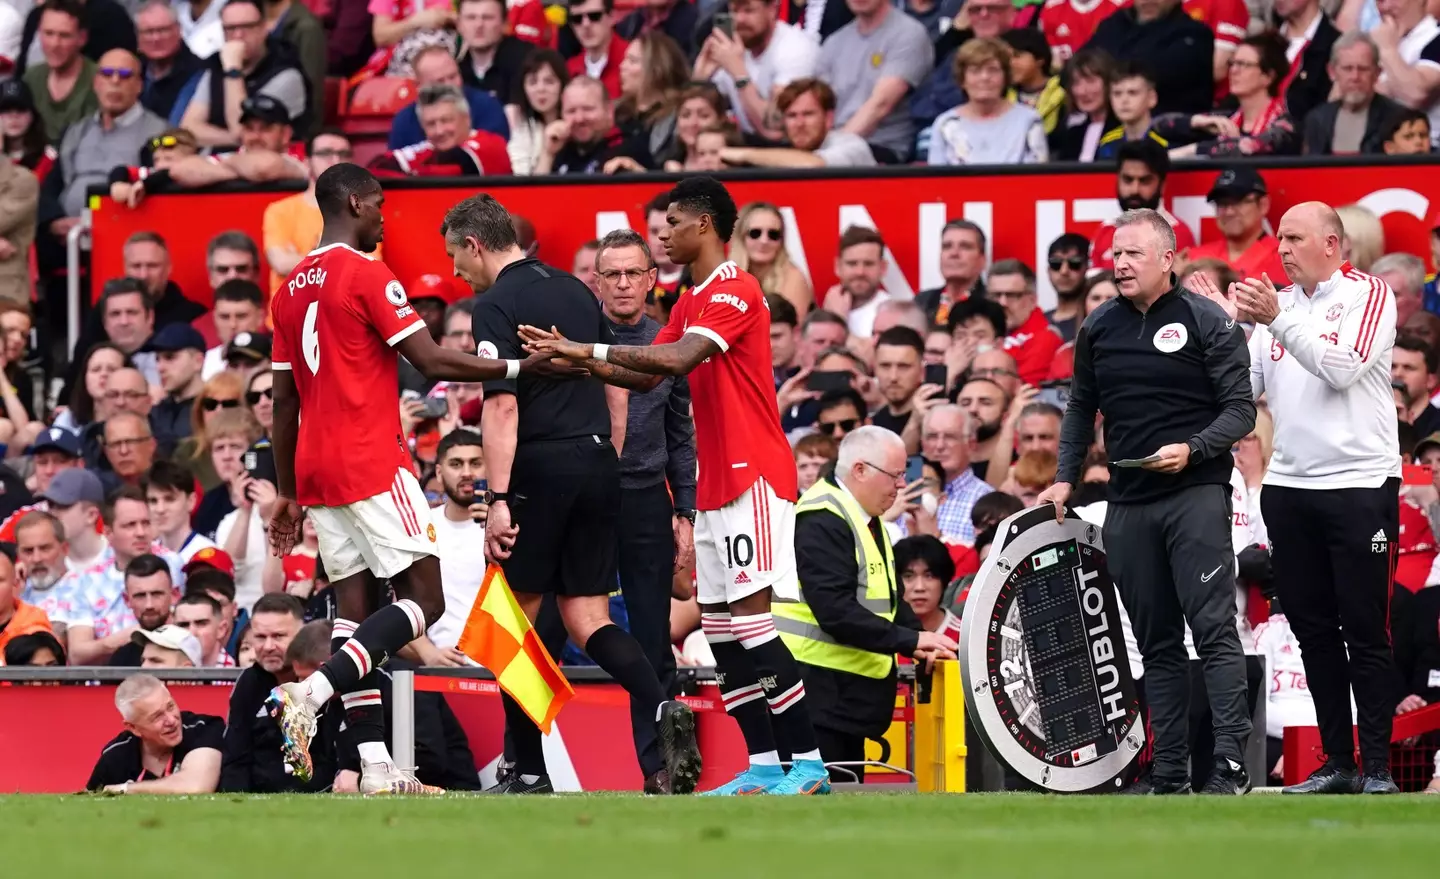 Fans cheered when Pogba was substituted against Norwich (Image: PA)